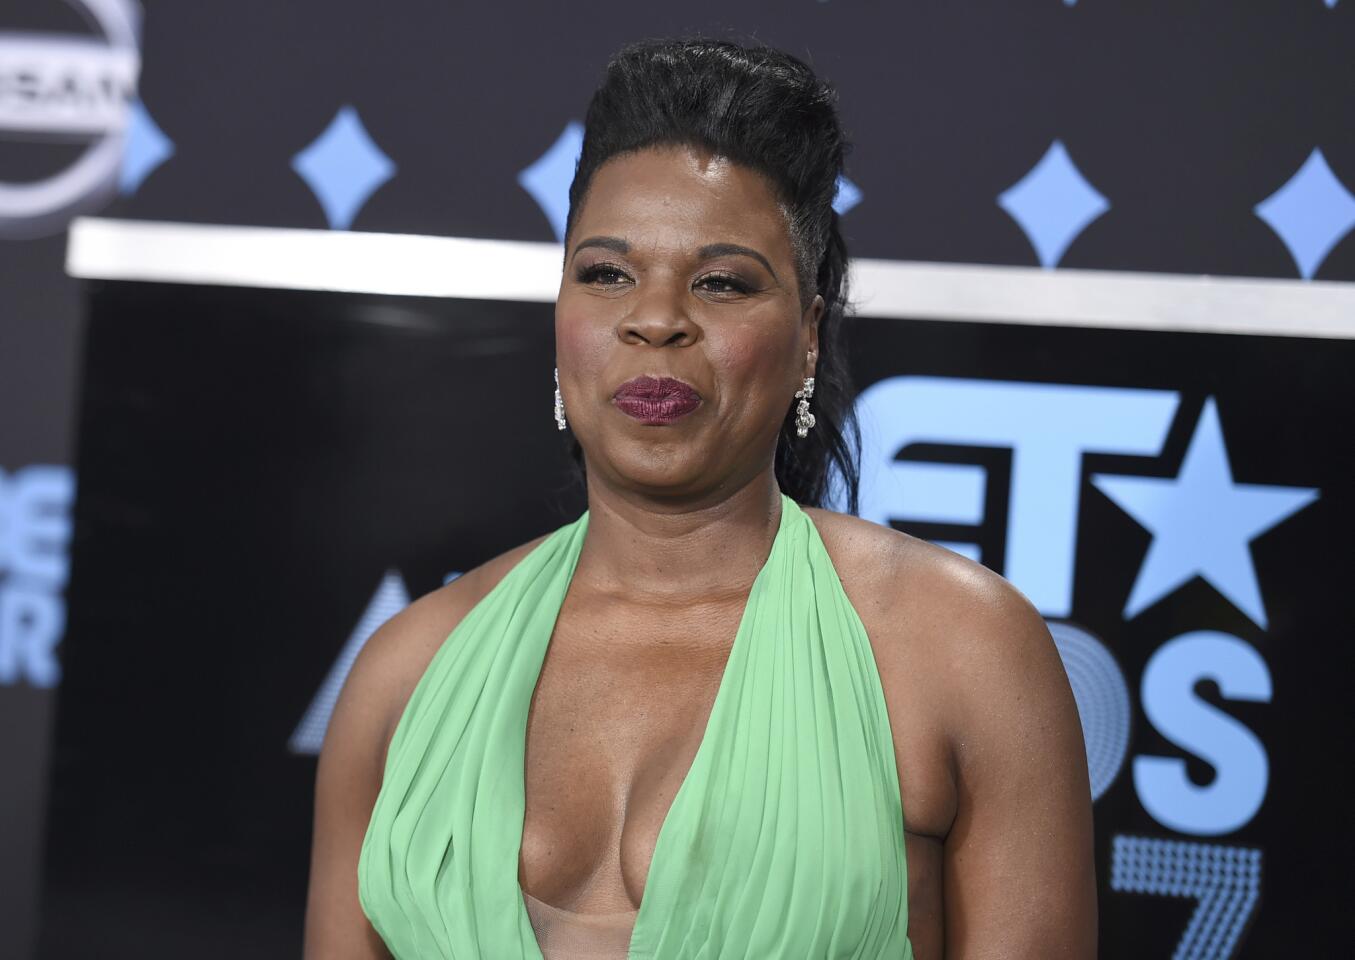 Host Leslie Jones arrives at the BET Awards at the Microsoft Theater in Los Angeles on Sunday.